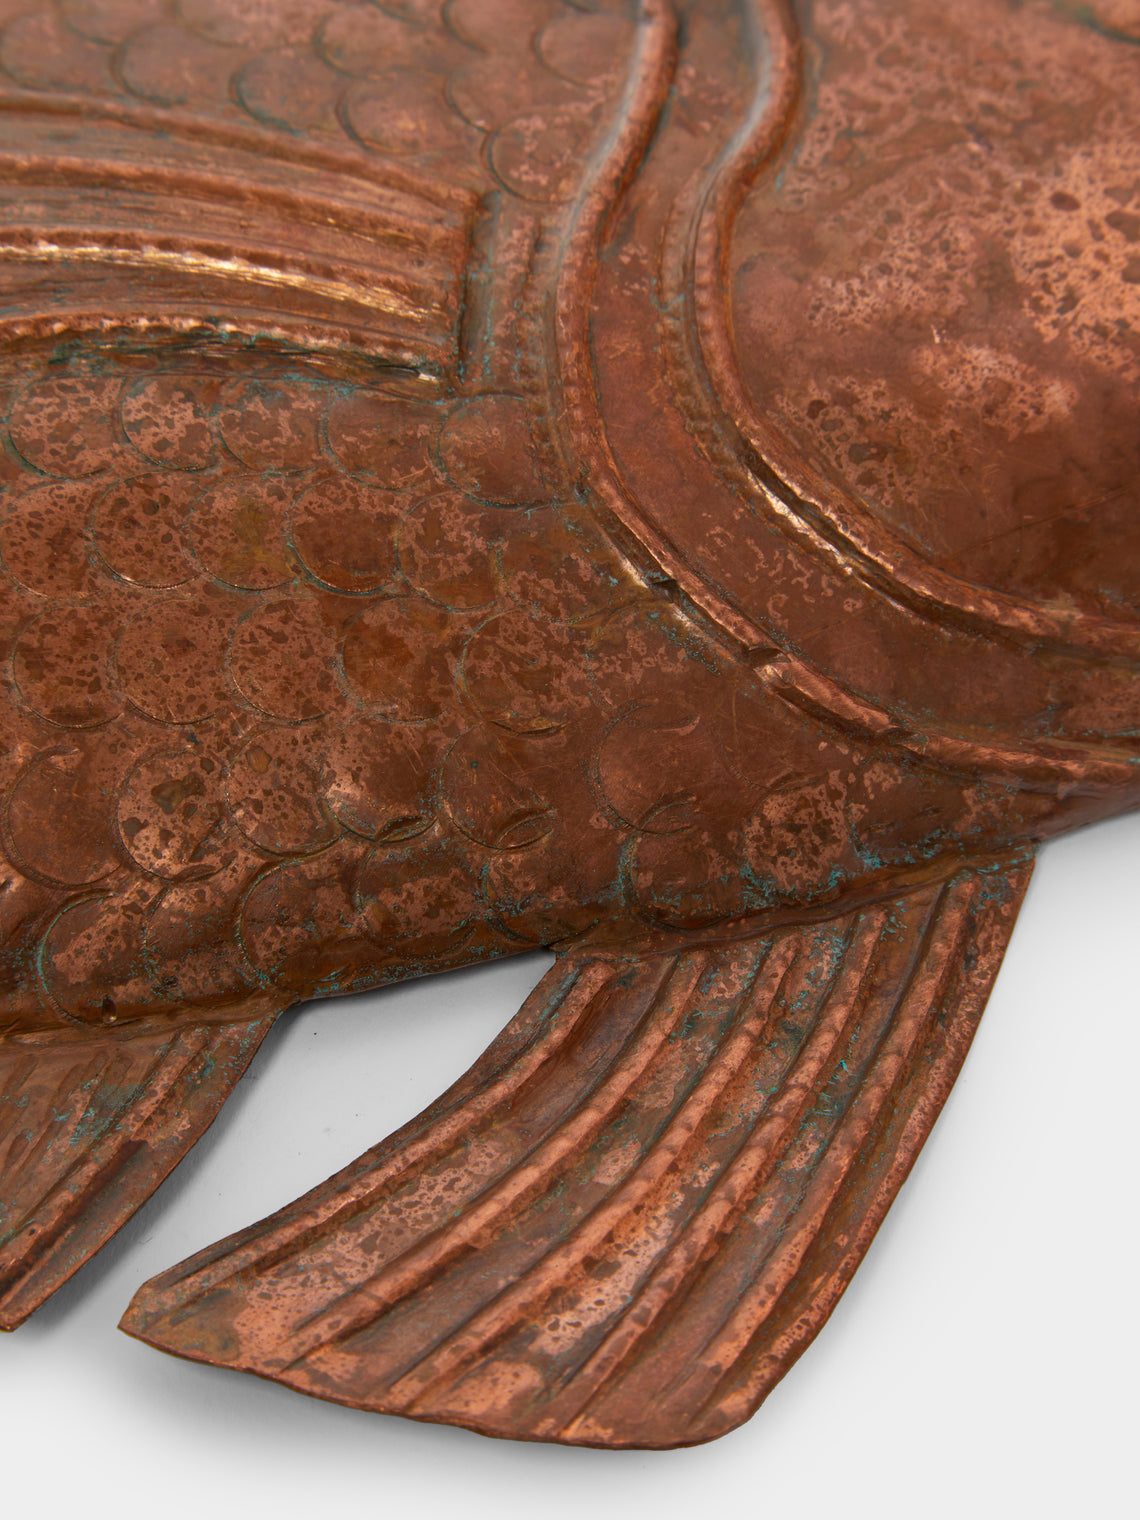 Antique and Vintage - 19th-Century Copper Fish -  - ABASK